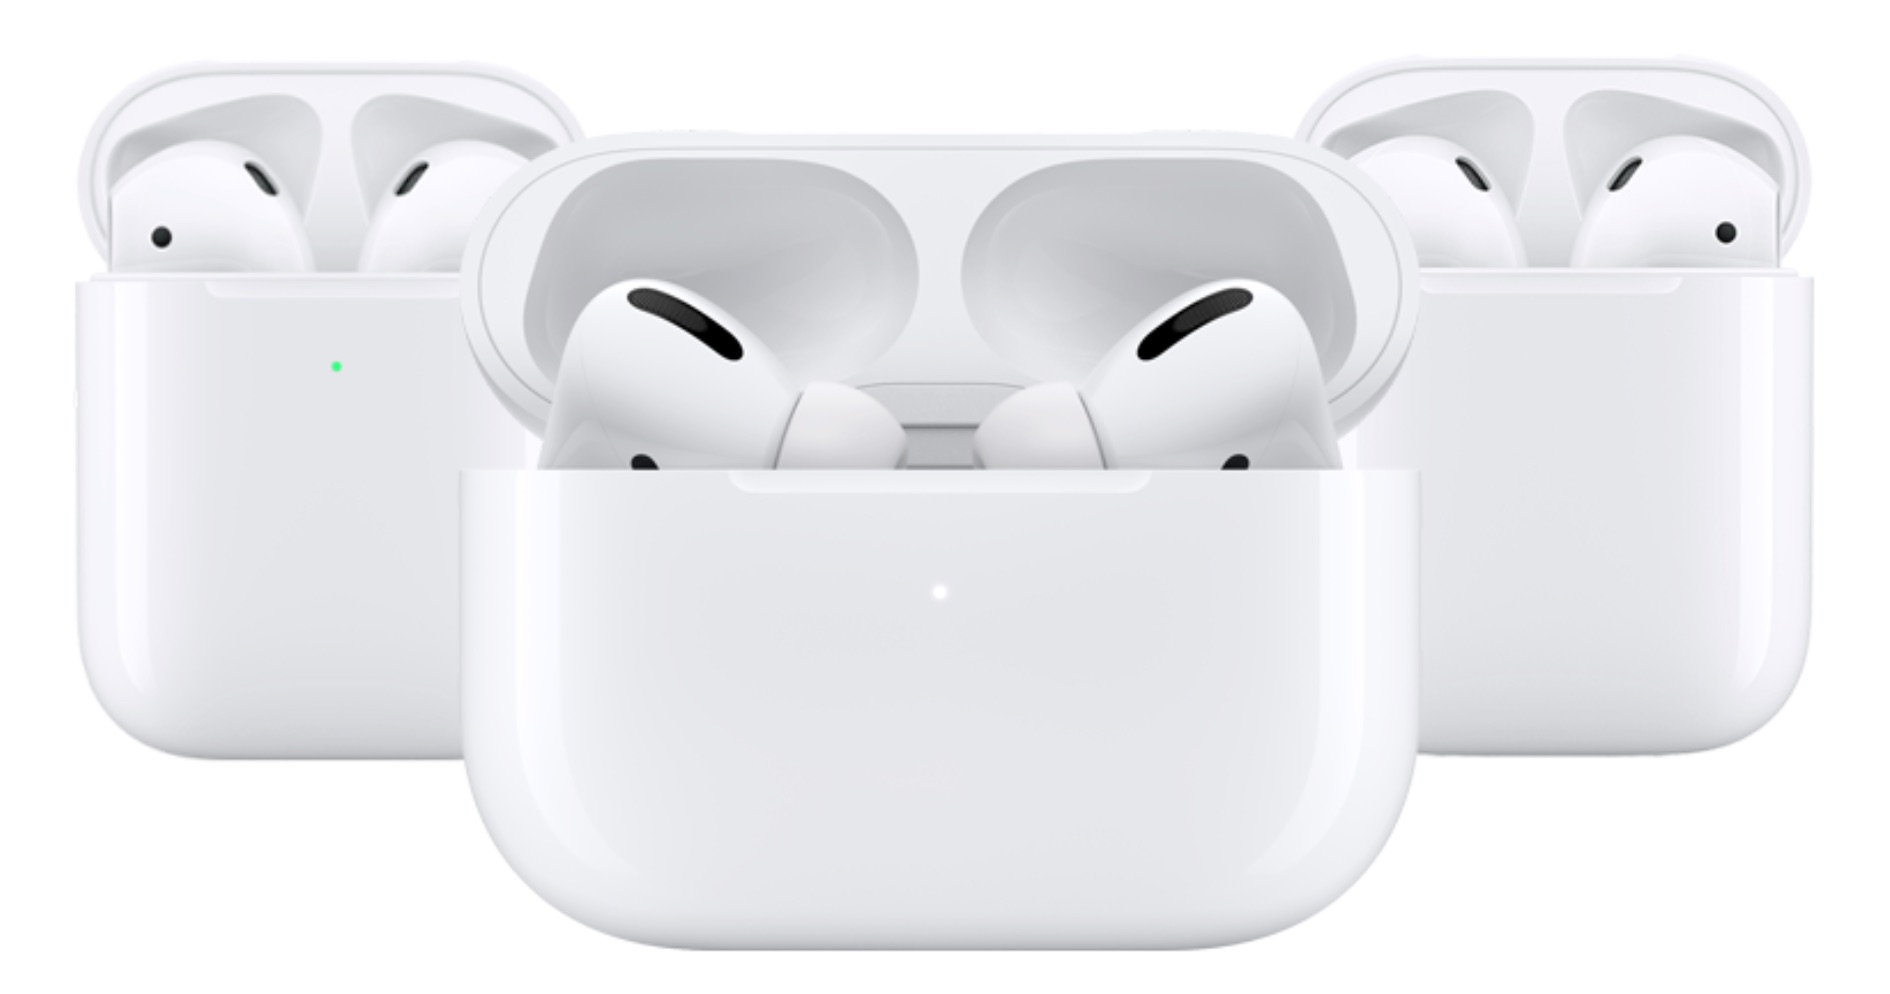 Airpods pro huilian. AIRPODS 2 индикатор зарядки. Индикатор заряда AIRPODS Pro. AIRPODS 1 индикатор заряда. AIRPODS Pro 3.